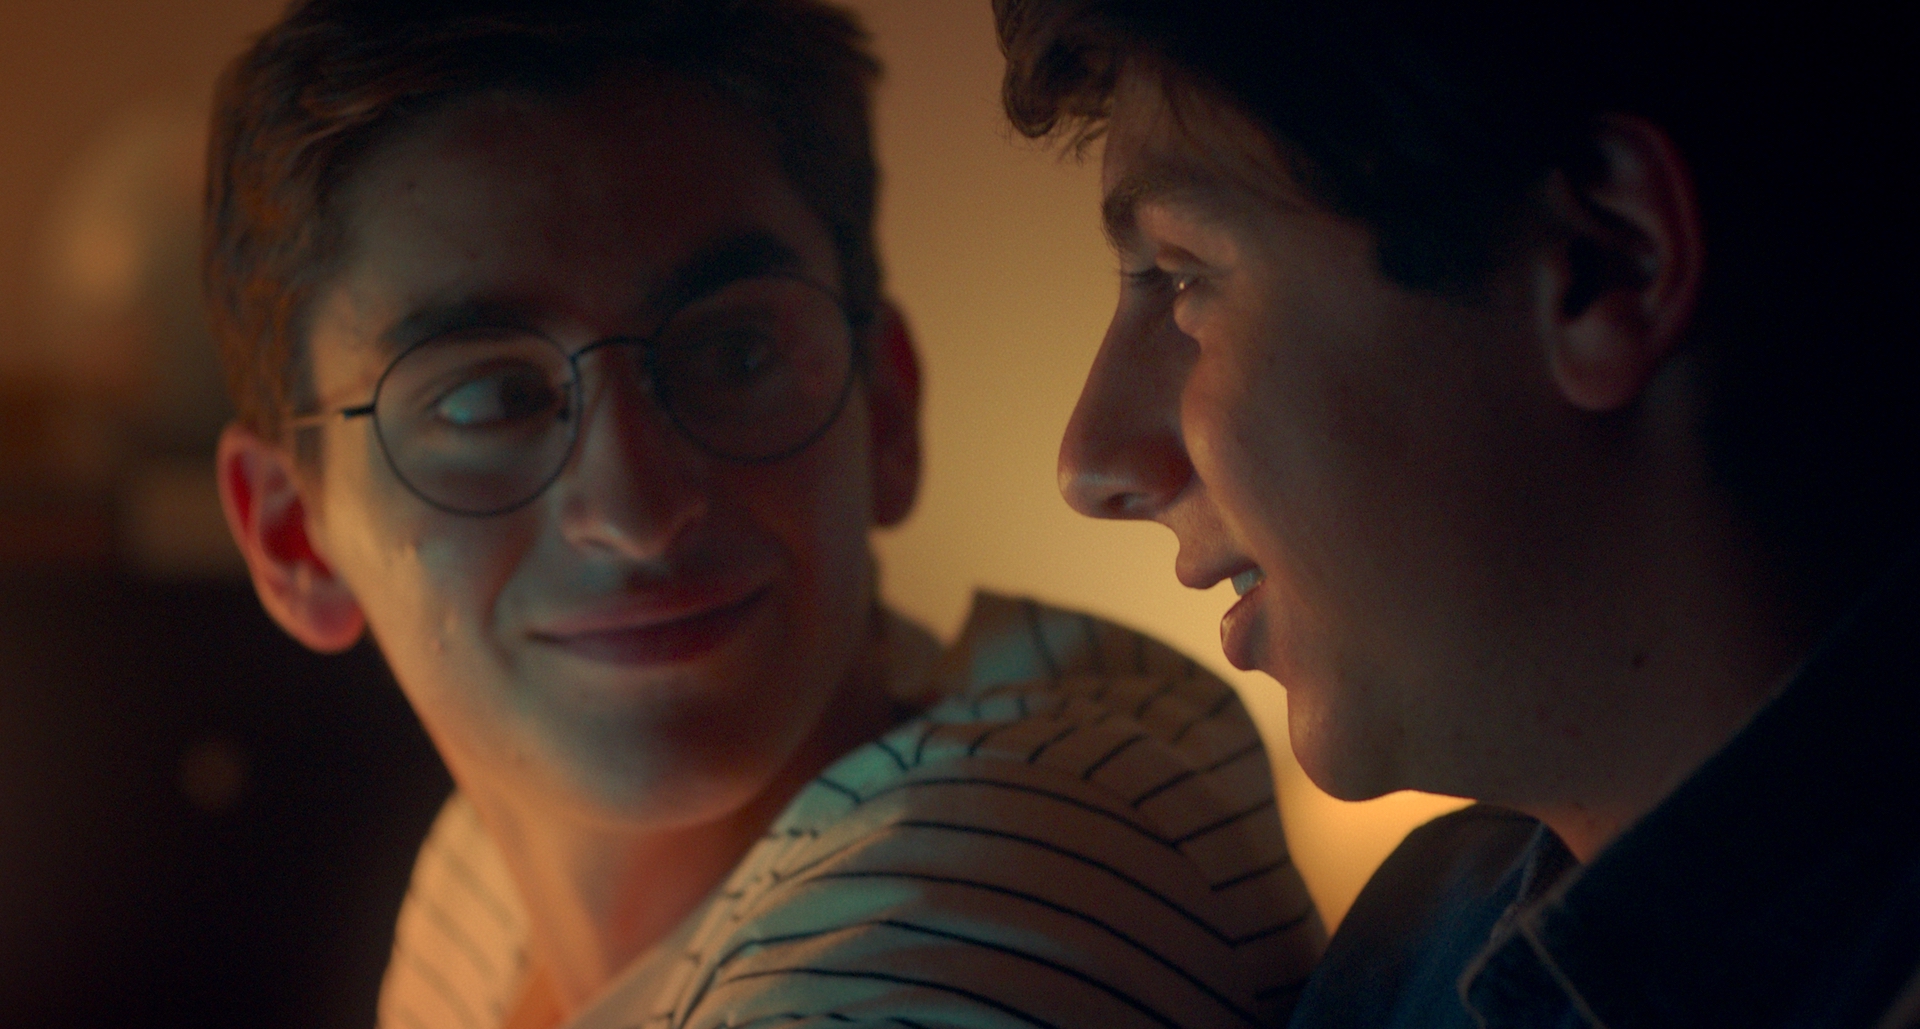 An intimate close up of two teenage boys who are looking at each other, smiling.